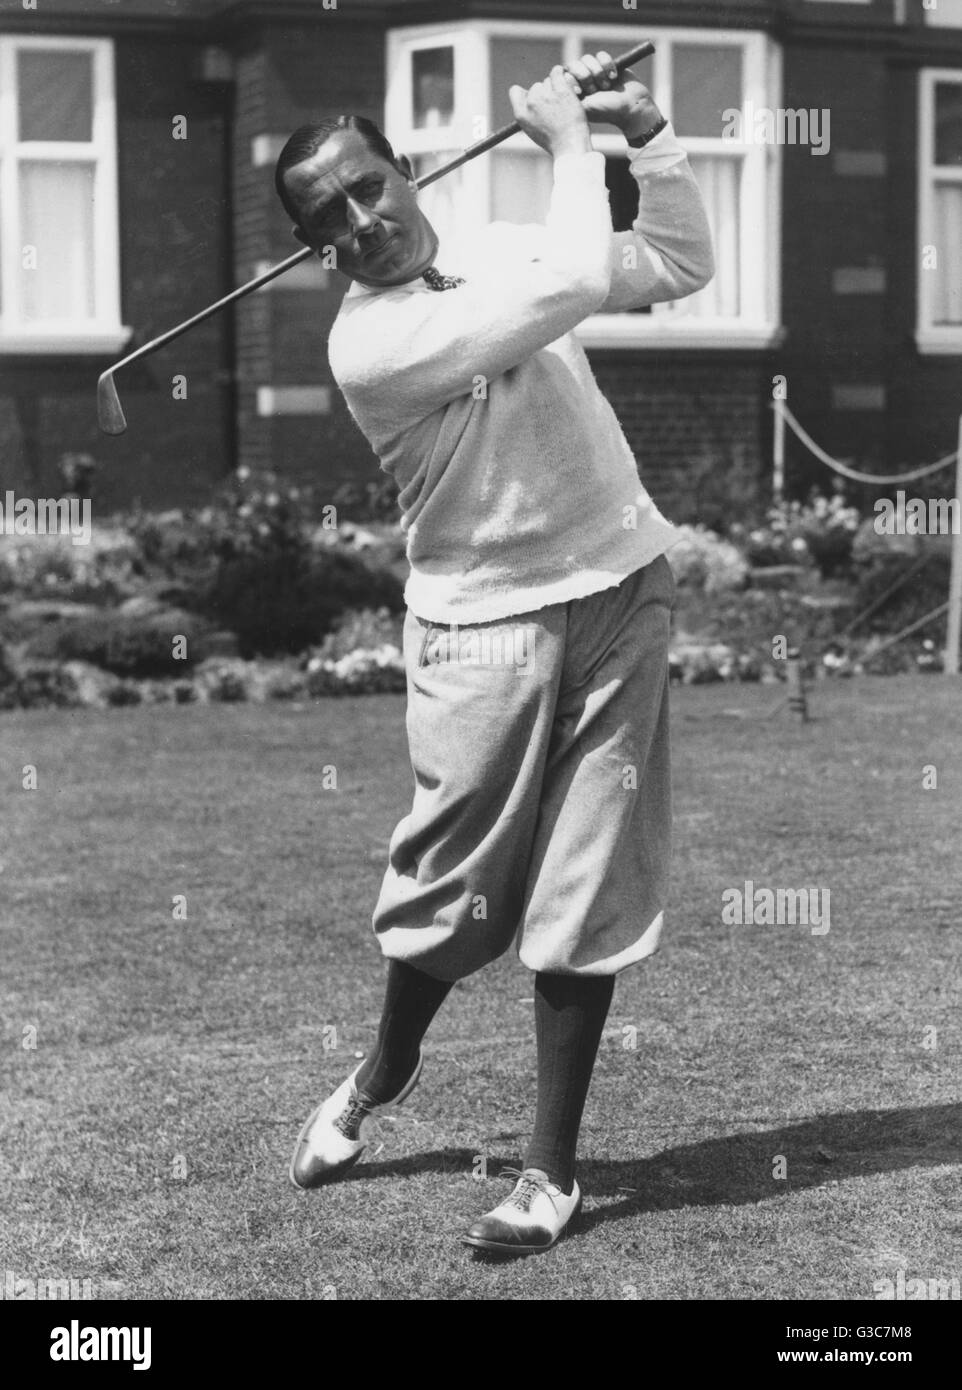 Walter Charles Hagen (1892-1969), American professional golfer, seen here at Royal Lytham St Anne's golf course on 24 June 1926.      Date: 1926 Stock Photo